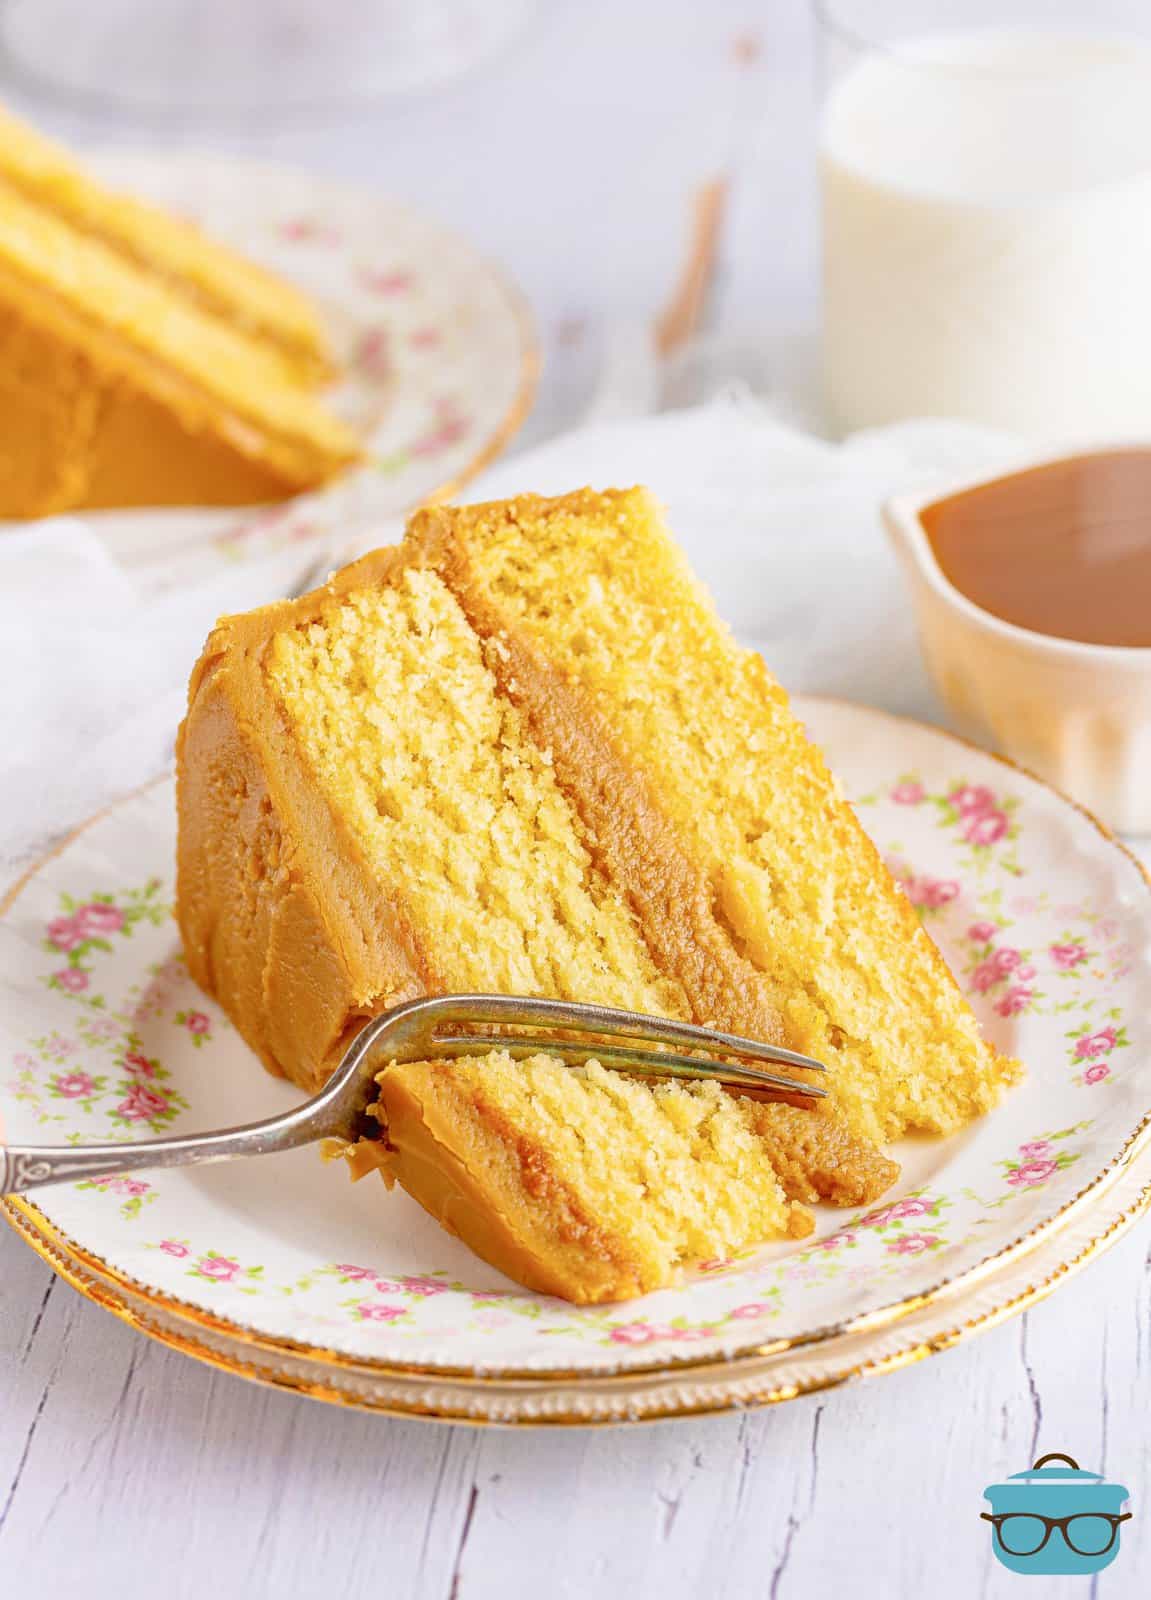 Slice of Southern Caramel Cake on white plate with fork cutting a bite out.